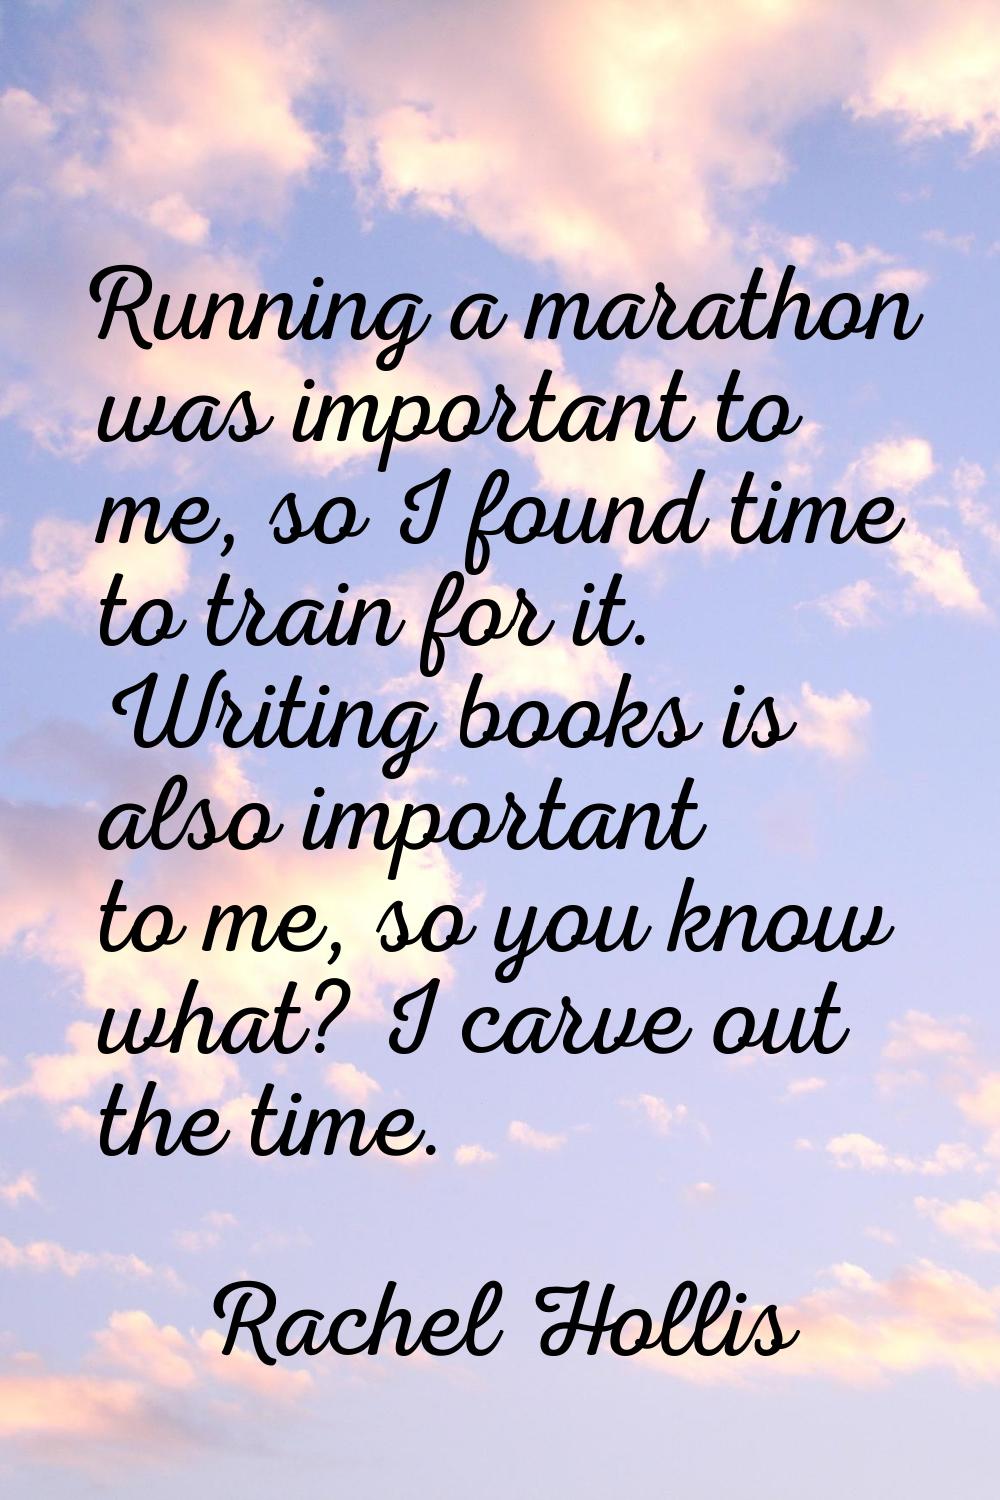 Running a marathon was important to me, so I found time to train for it. Writing books is also impo